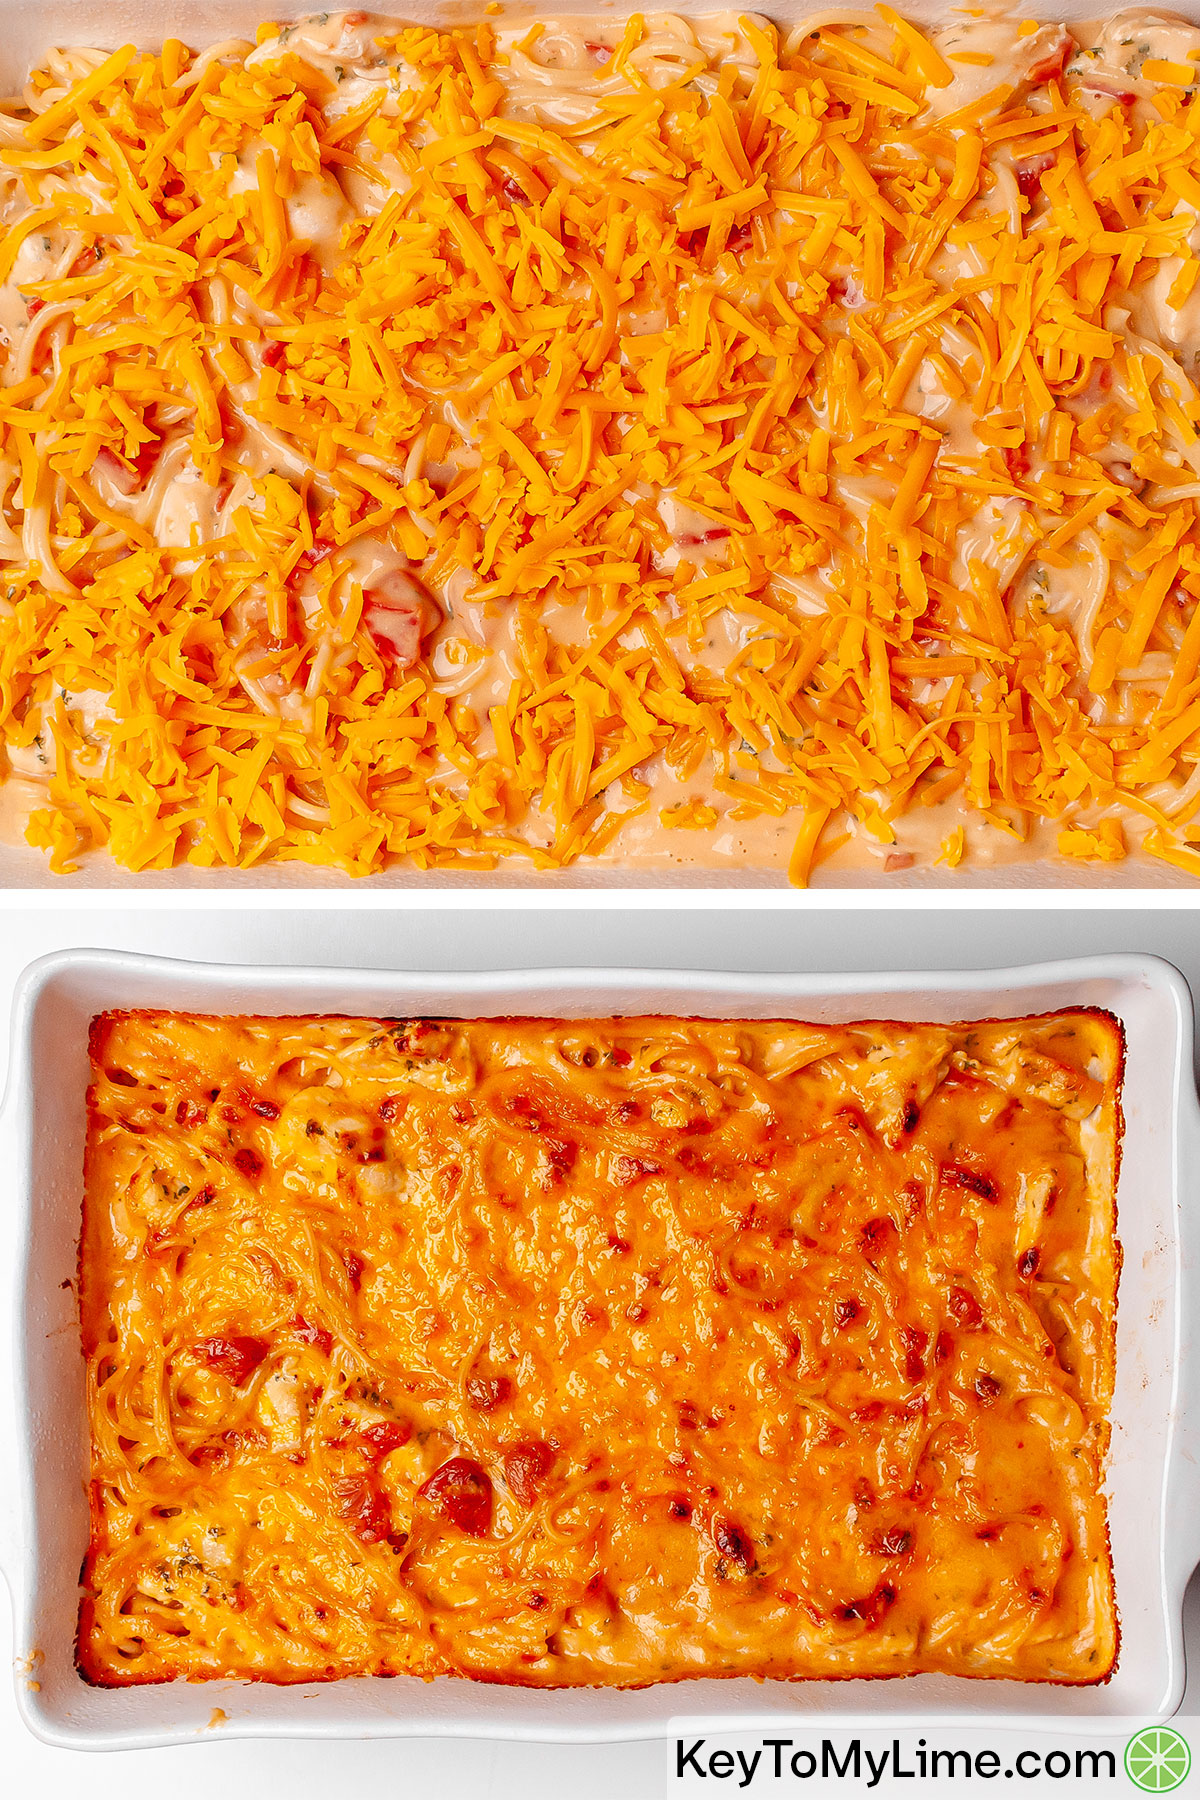 Chicken spaghetti with RO-TEL in a casserole dish, shown before and after baking.